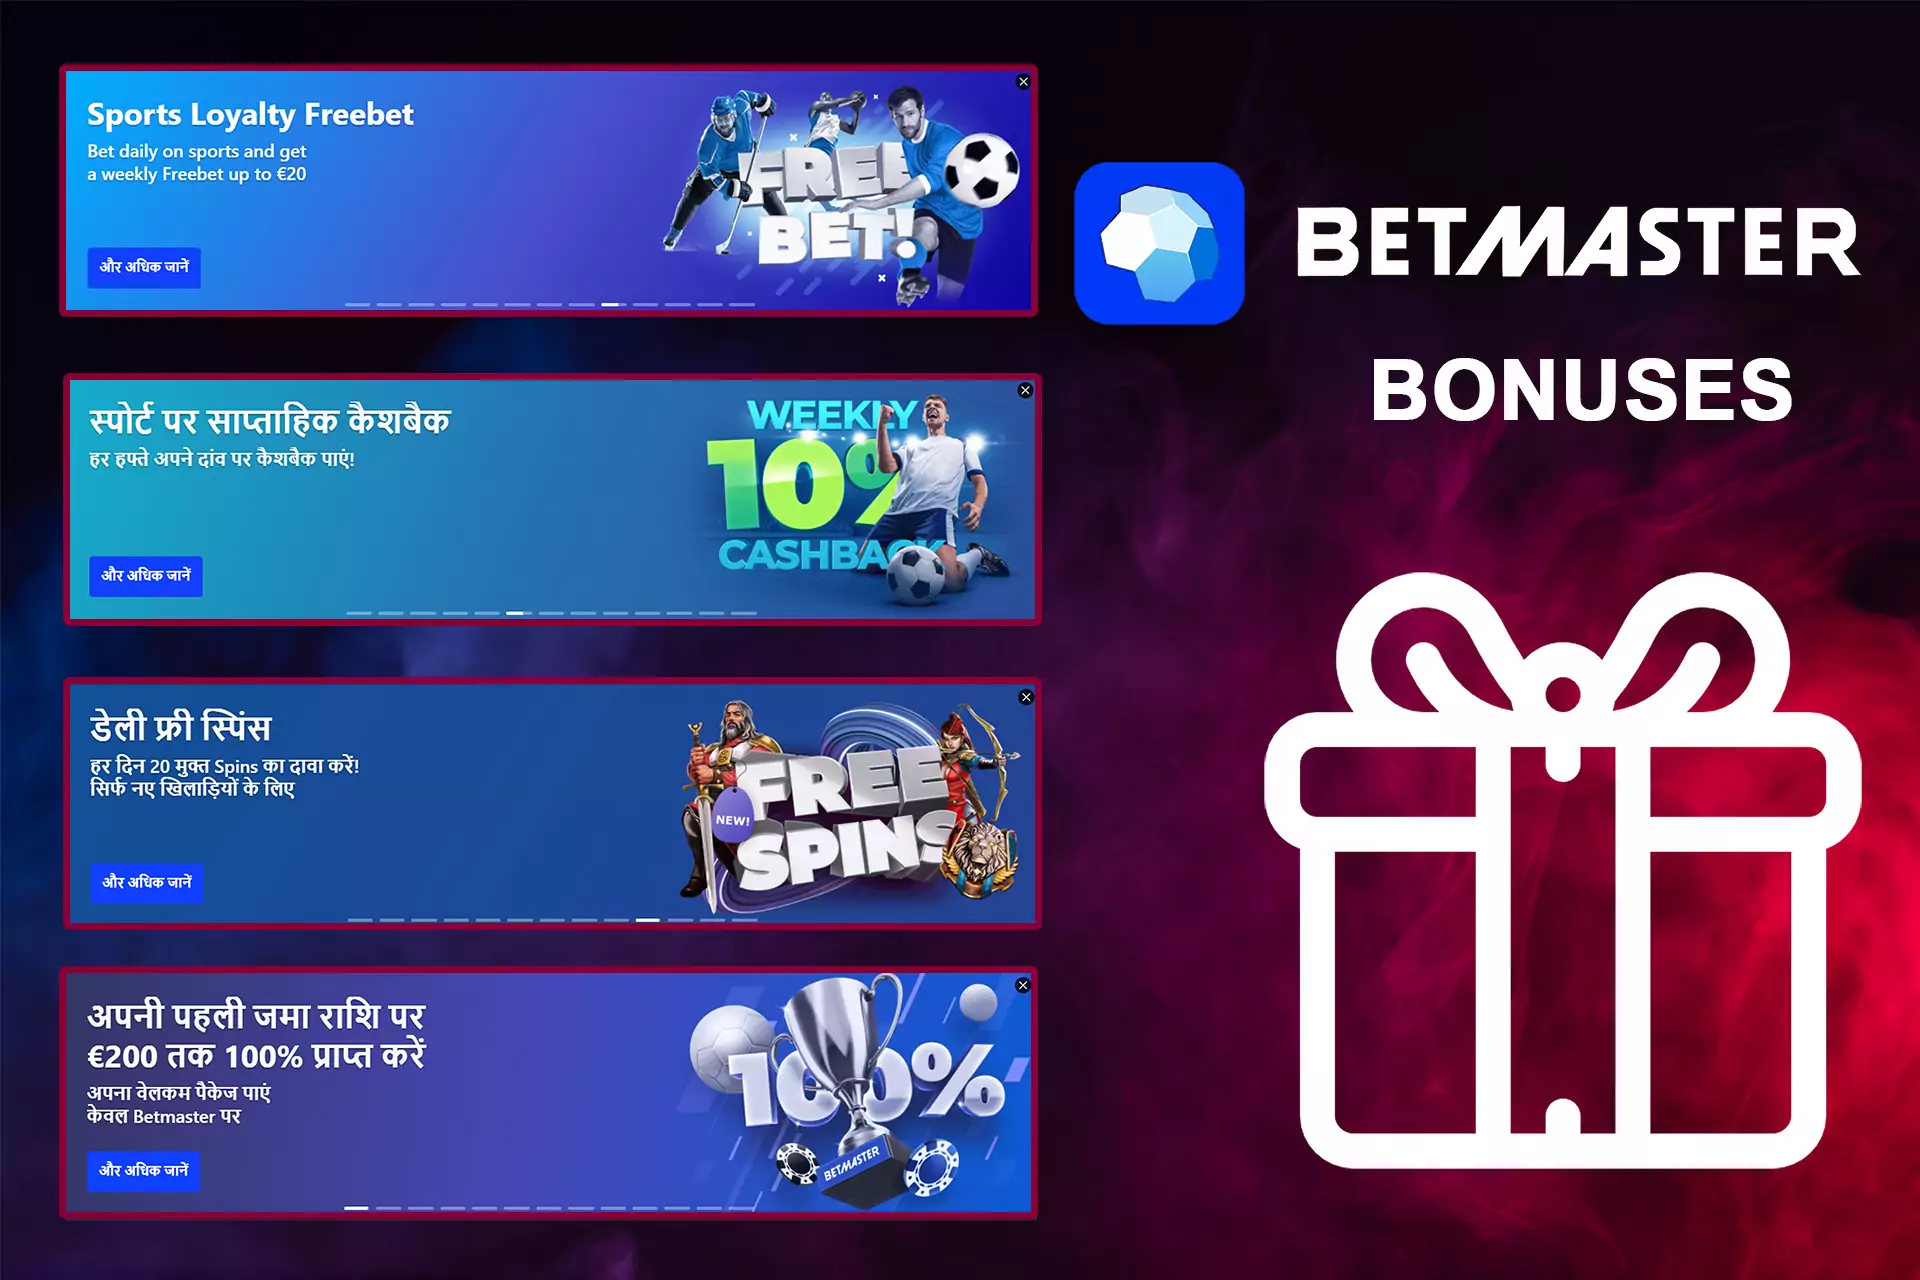 There are lots of bonus programs in Betmaster.